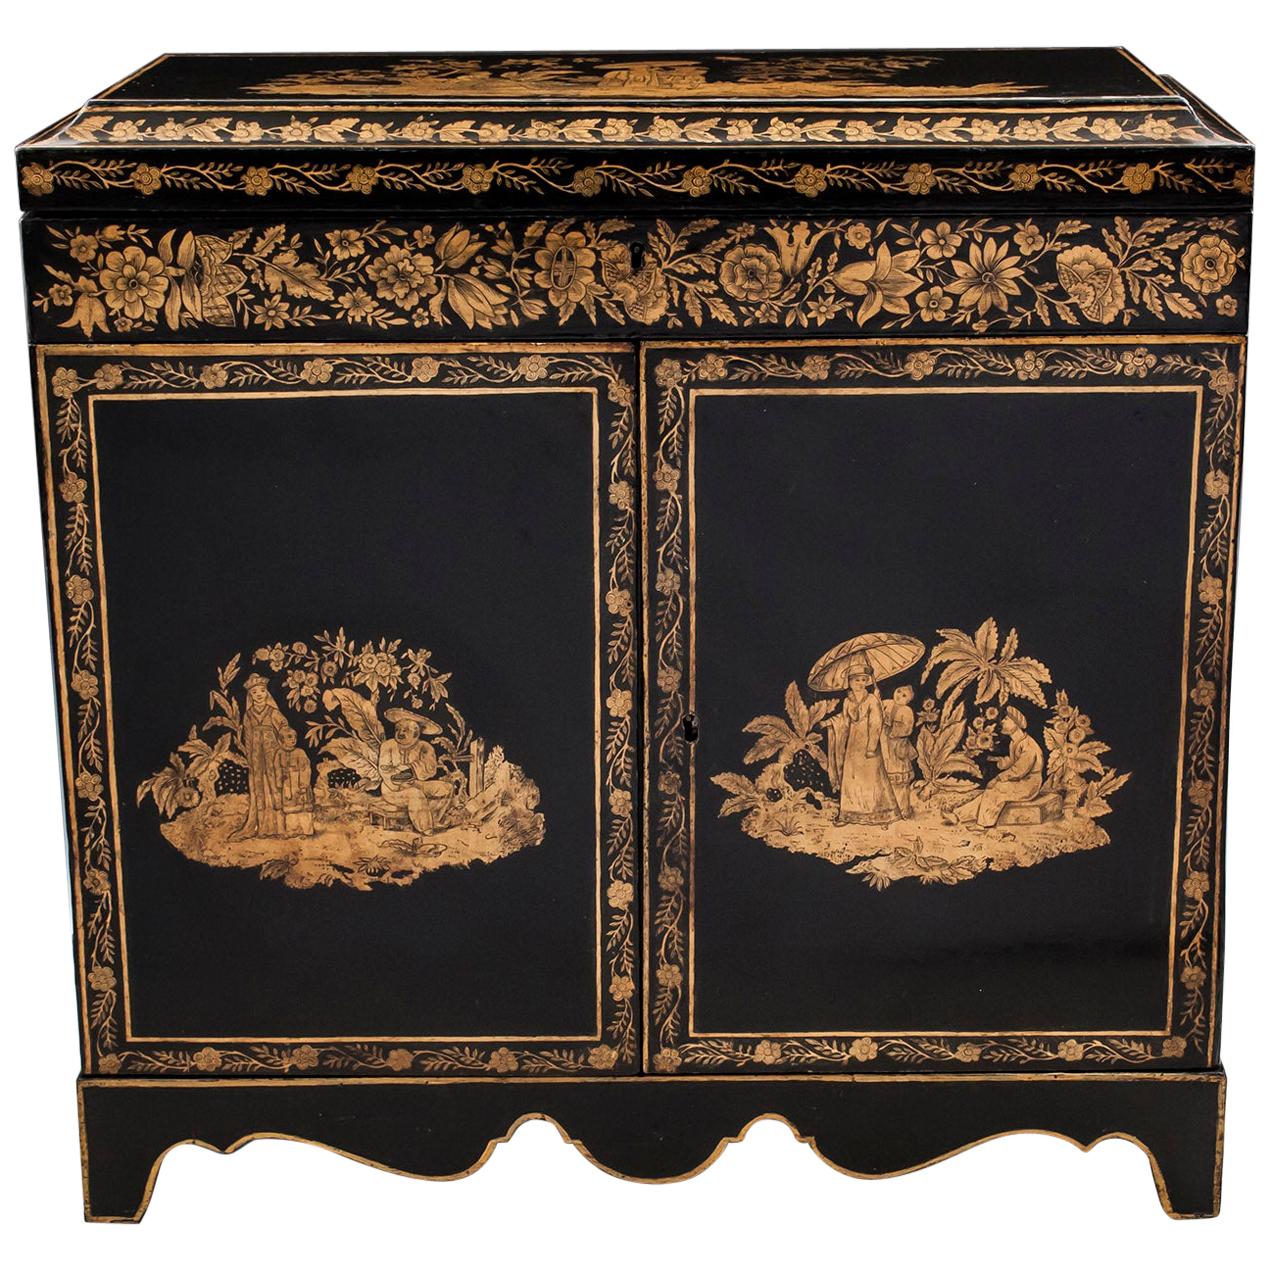 Chinoiserie Penwork Grand Tour Treasure Cabinet Early 19th Century For Sale